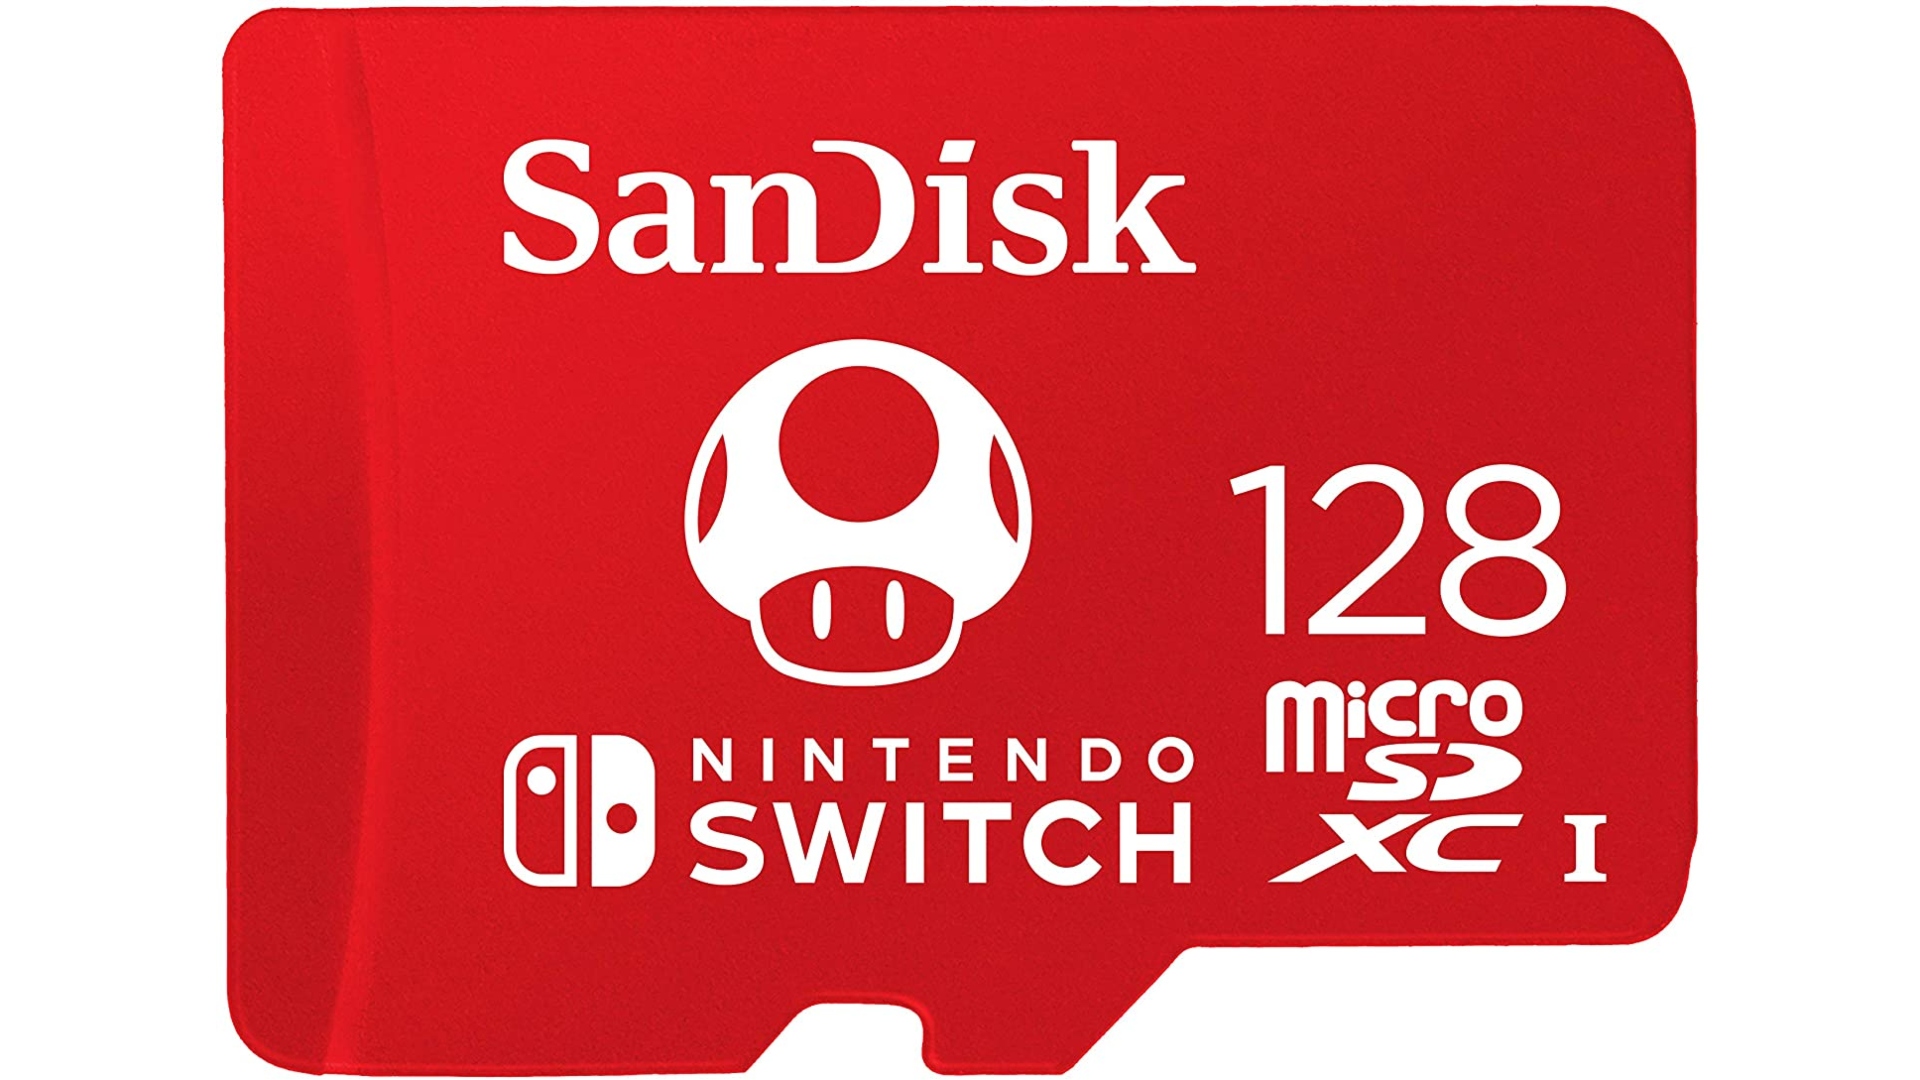 Expand your Switch’s memory with 40% off this SanDisk microSDXC card